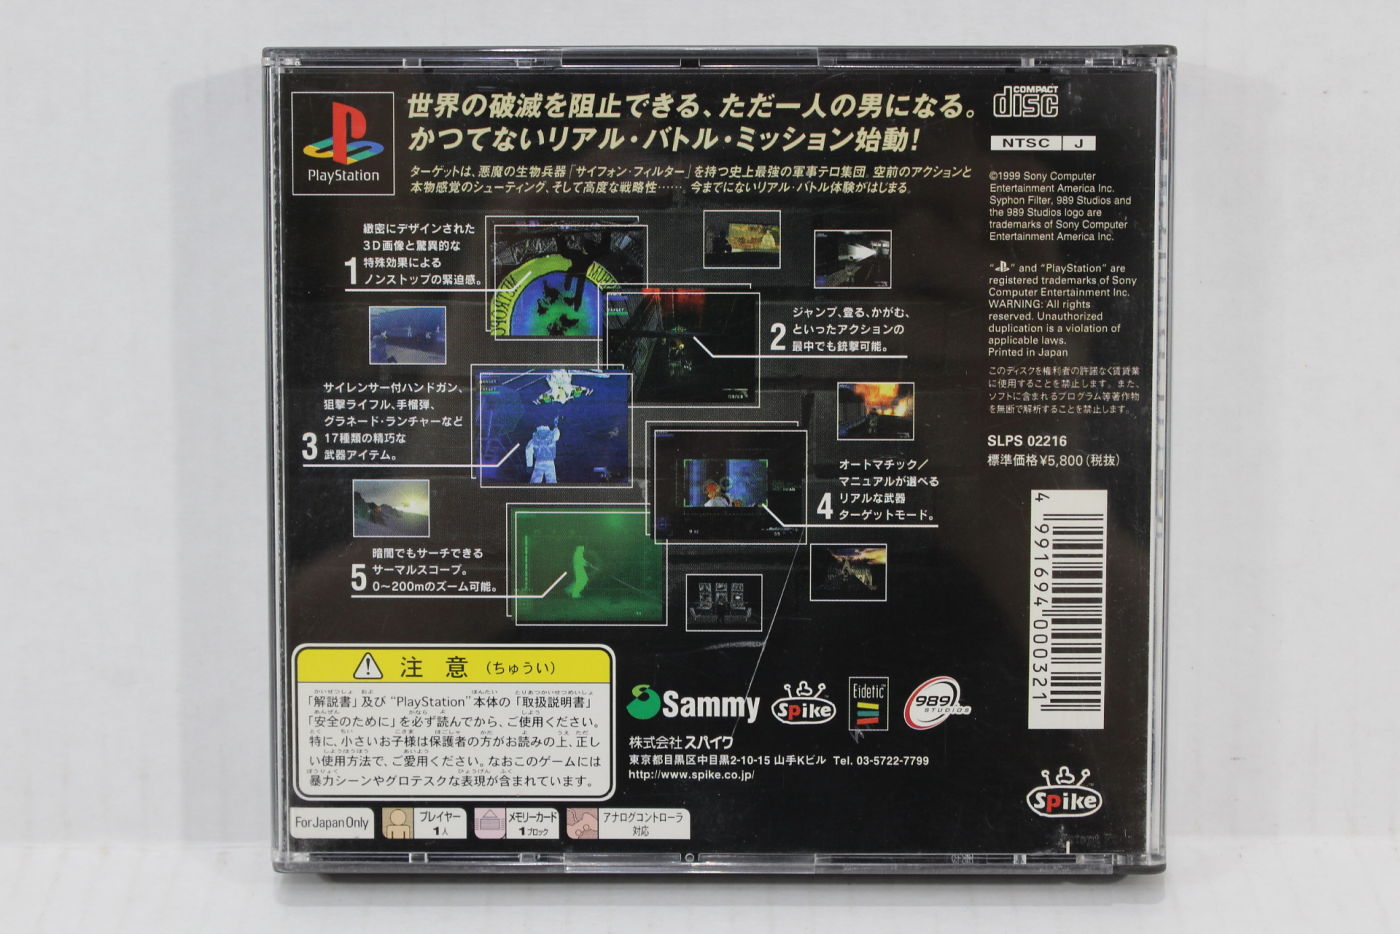 Syphon Filter [PS1 - Used Good Condition]